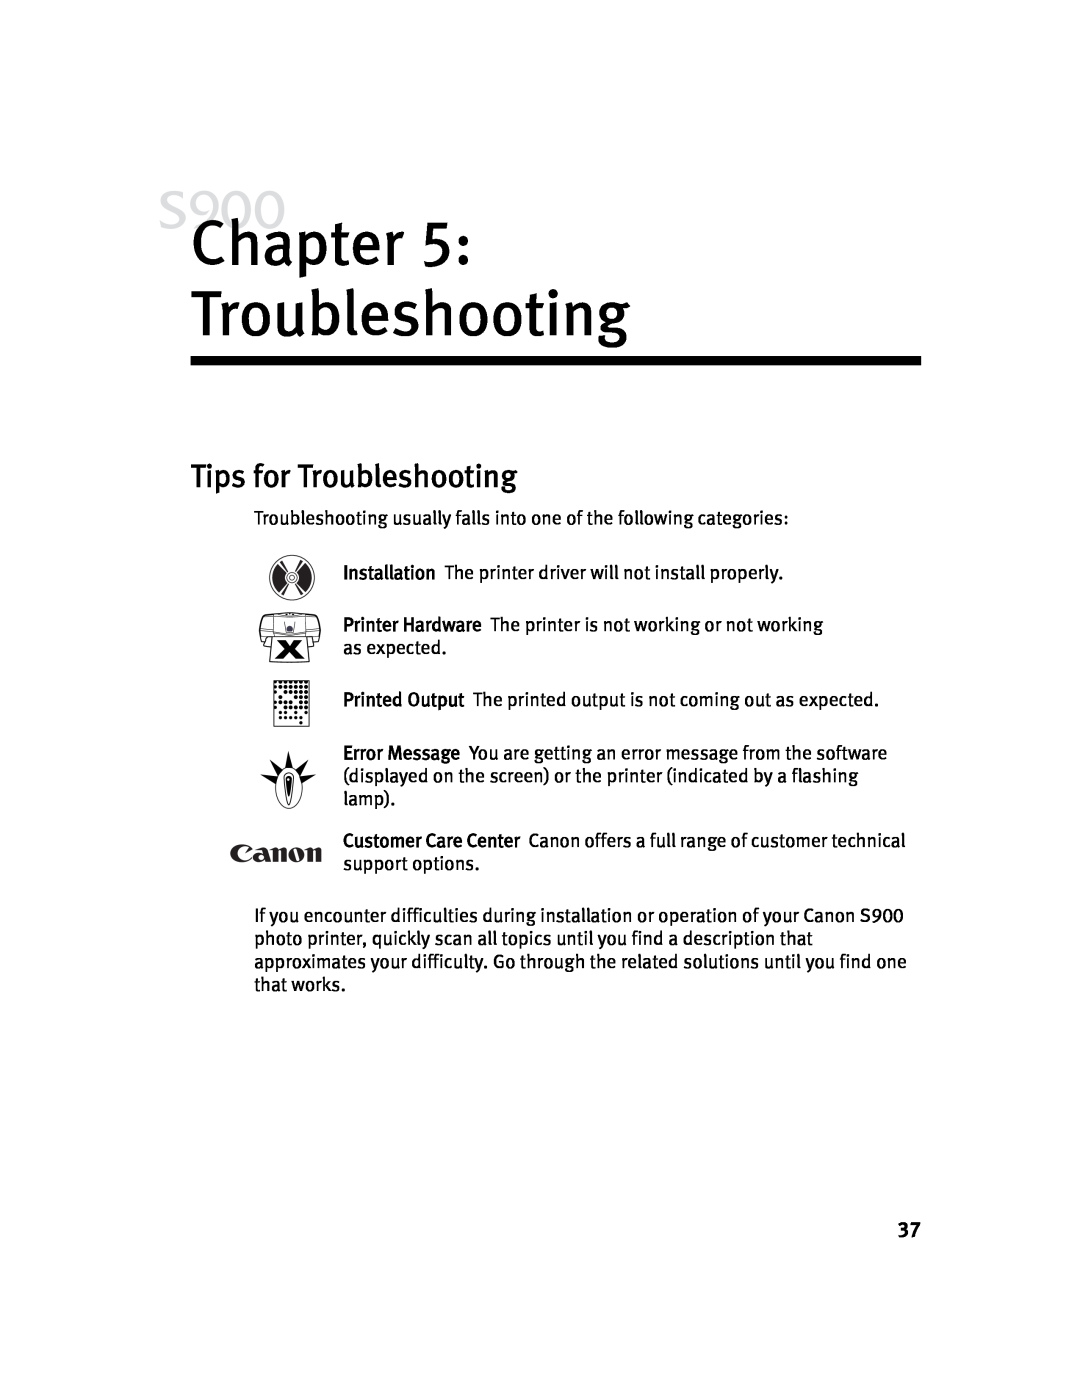 Canon S900 quick start Chapter Troubleshooting, Tips for Troubleshooting 